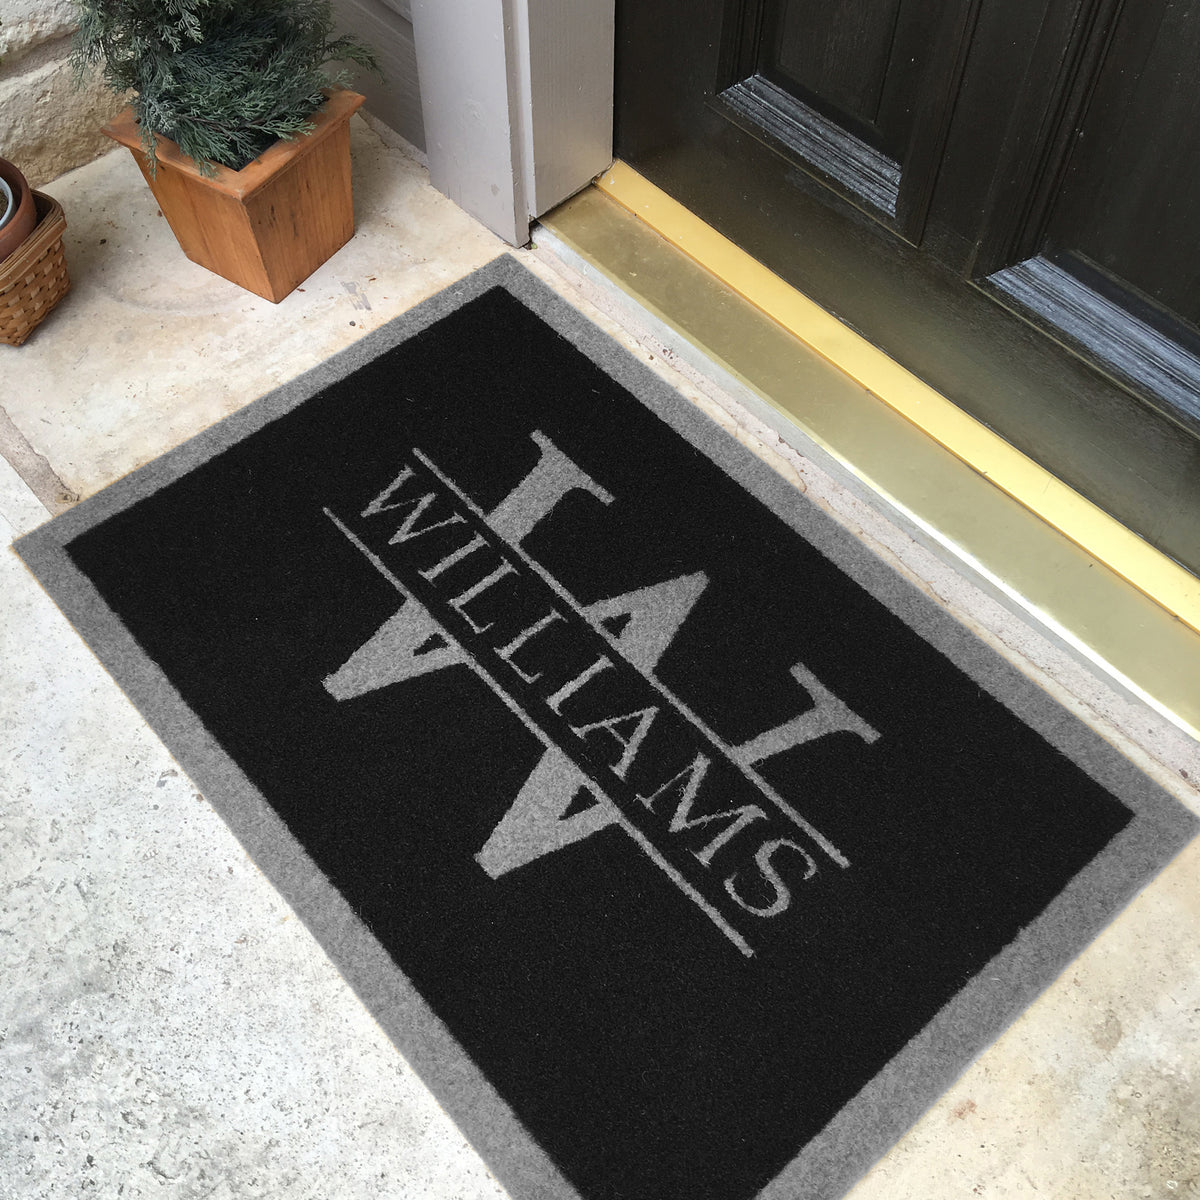 Infinity Custom Mats™ All-Weather Personalized Door Mat - STYLE: WILLIAMS COLOR: BLACK / GREY - rugsthatfit.com